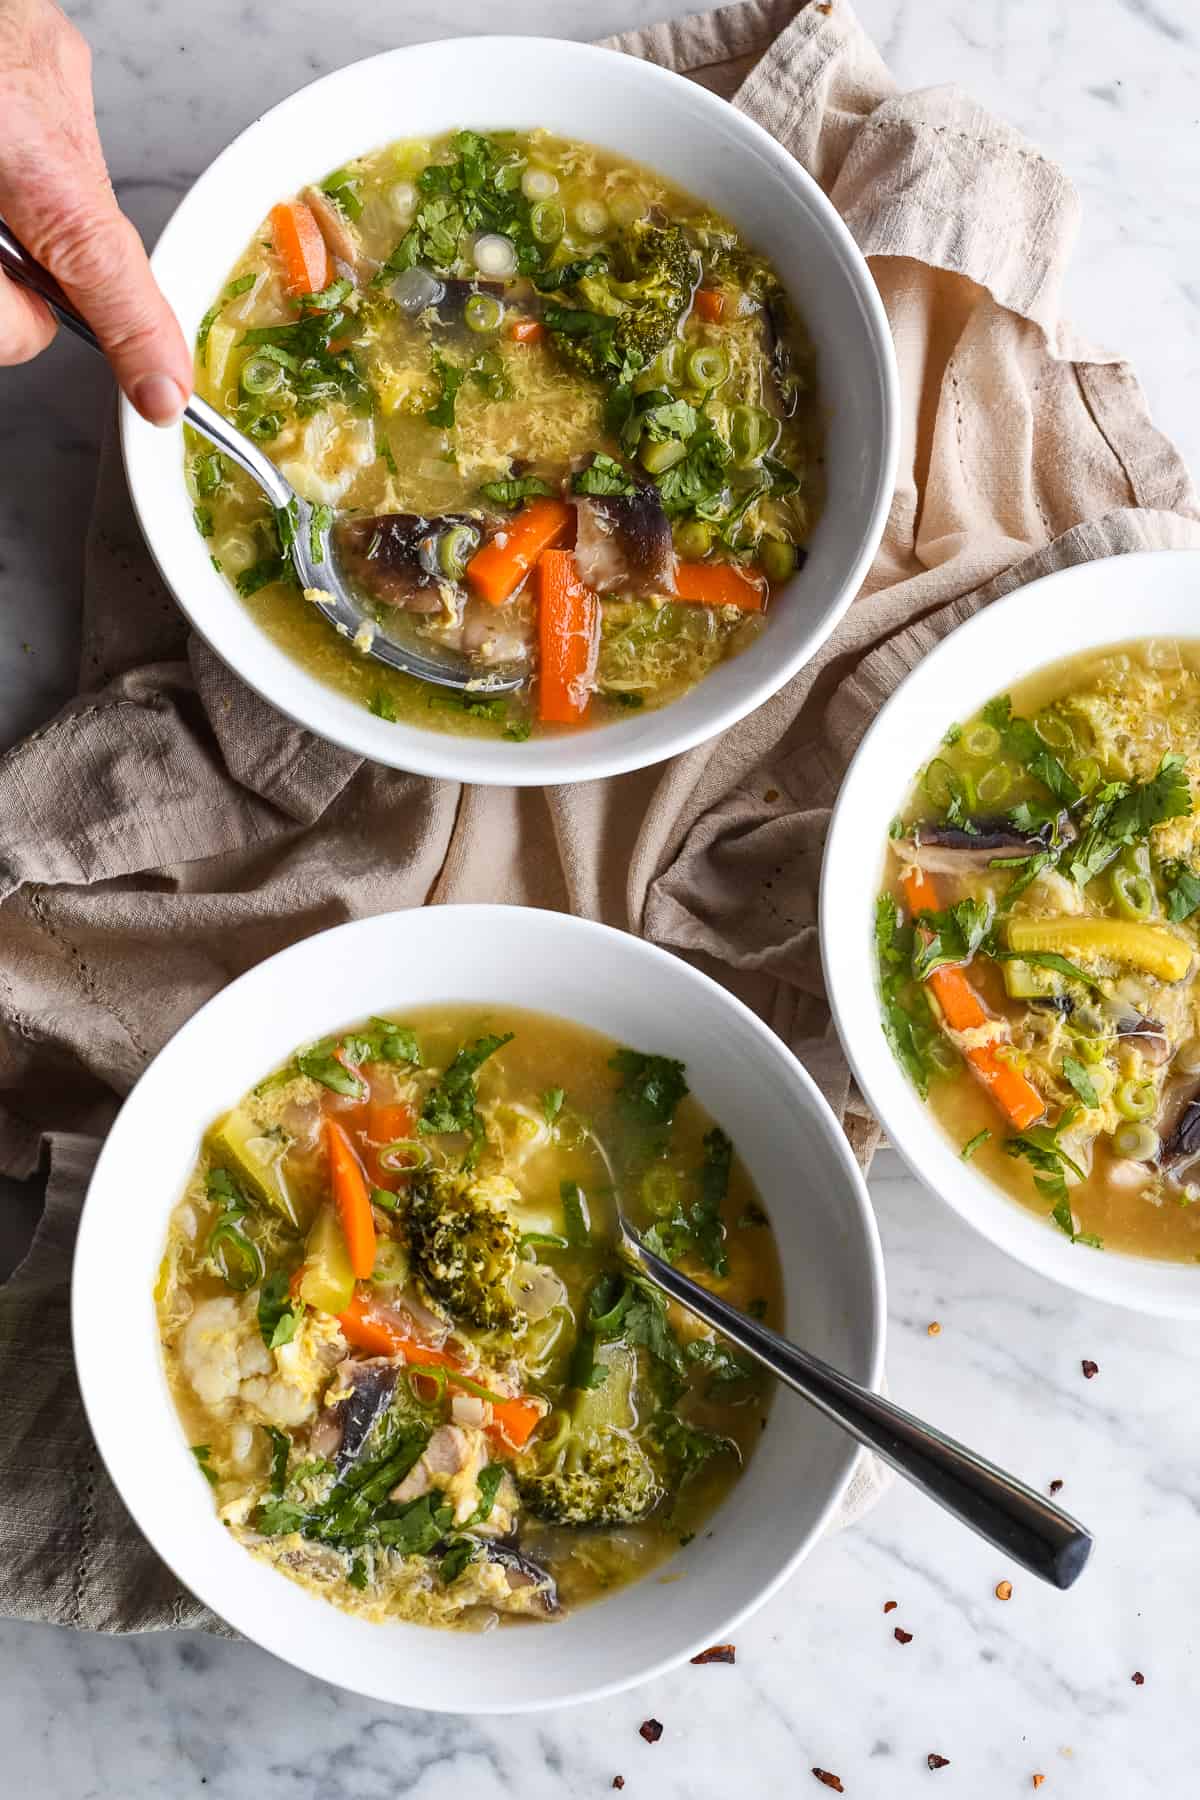 Vegetable Hot and Sour Soup 3 bowls with hand taking soup